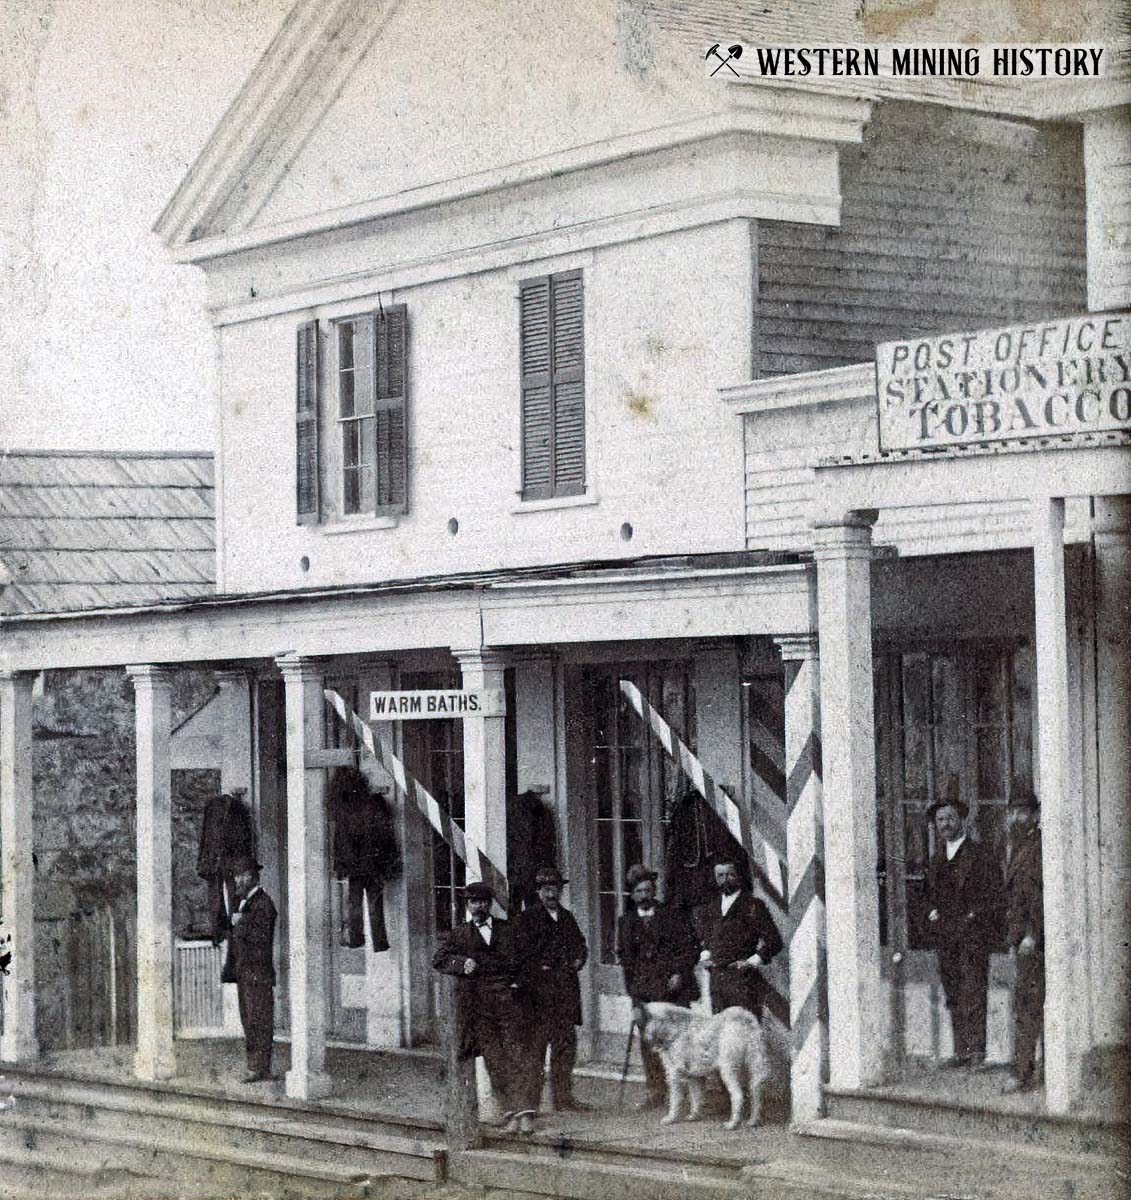 Early view of a Dutch Flat, California commercial building